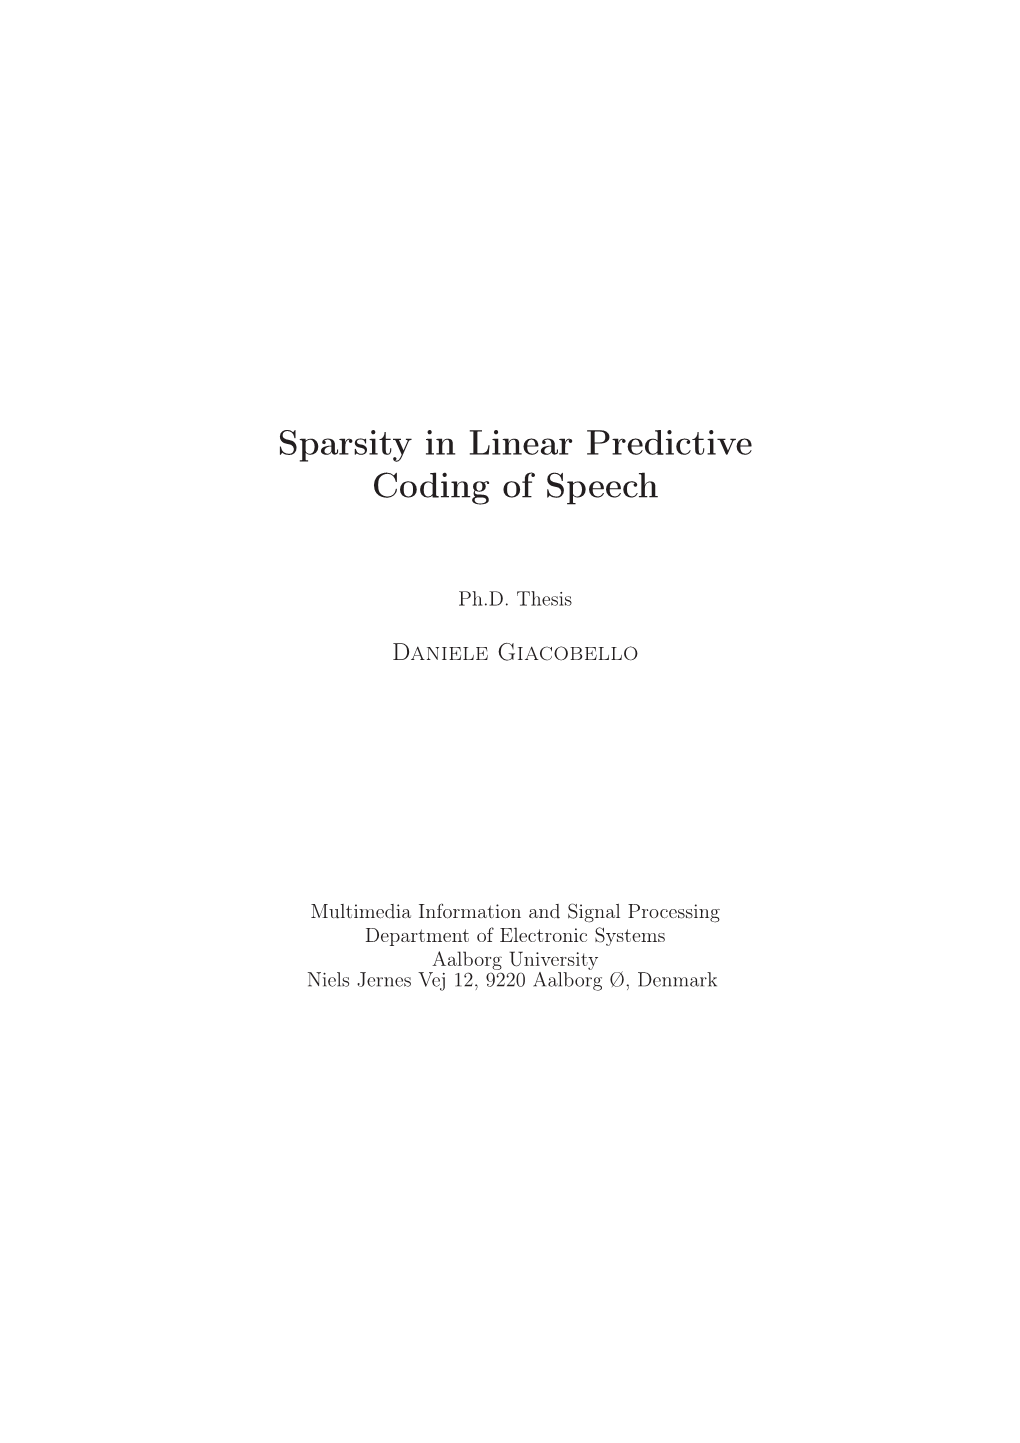 Sparsity in Linear Predictive Coding of Speech